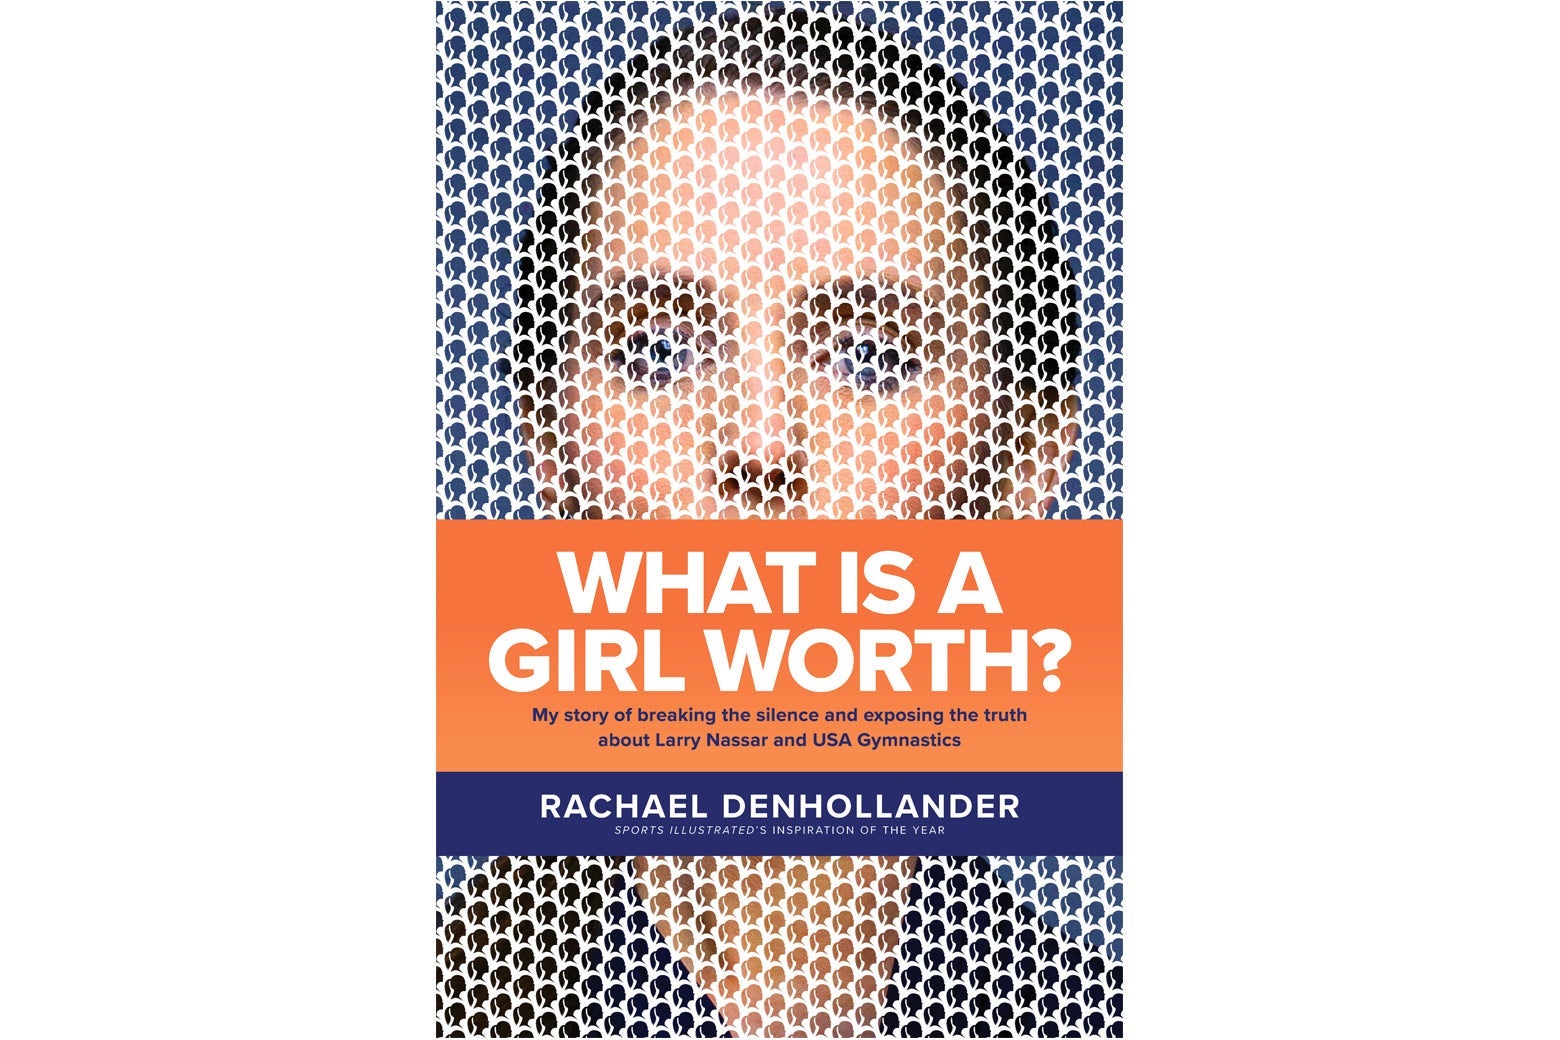 What Is a Girl Worth? book cover.